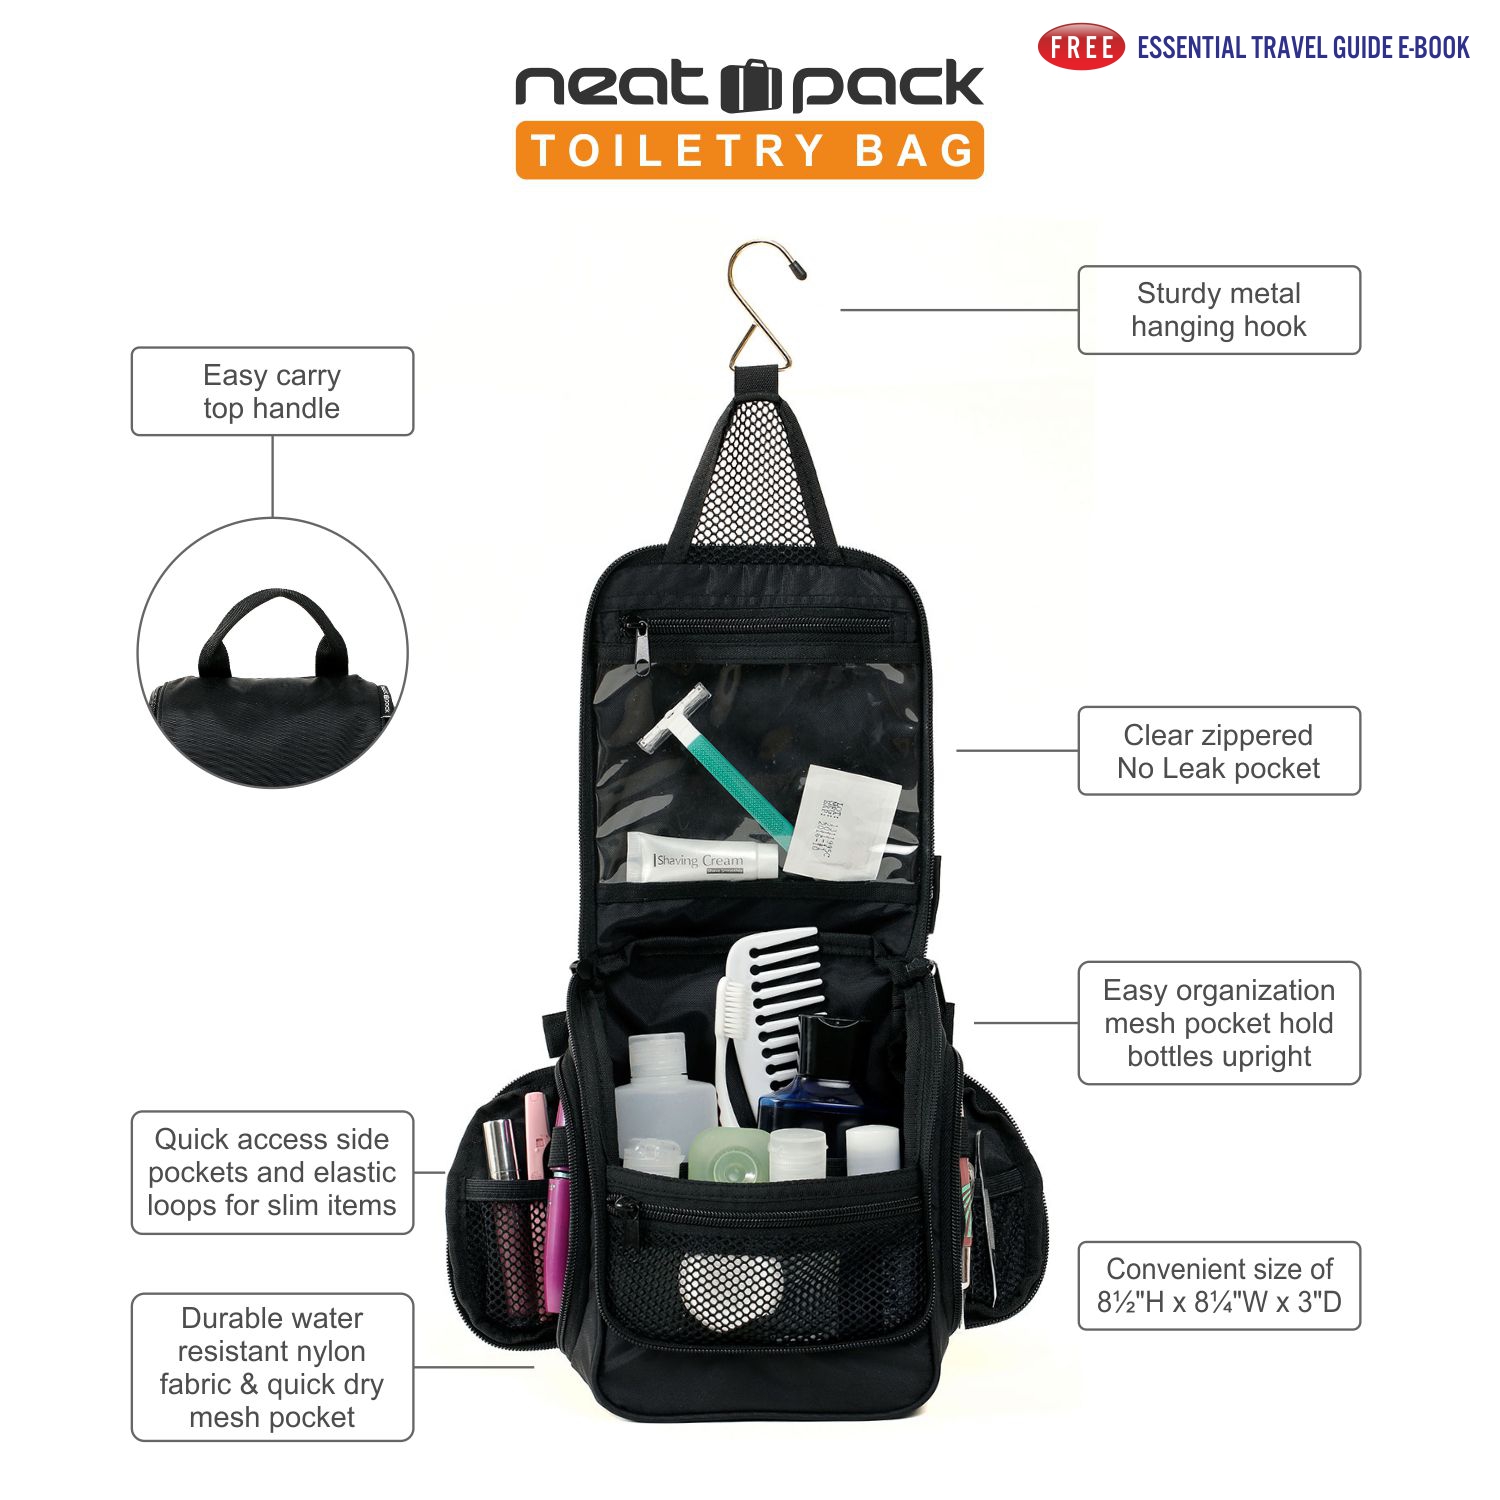 NeatPack Compact Hanging Toiletry Bag, Black - image 2 of 10